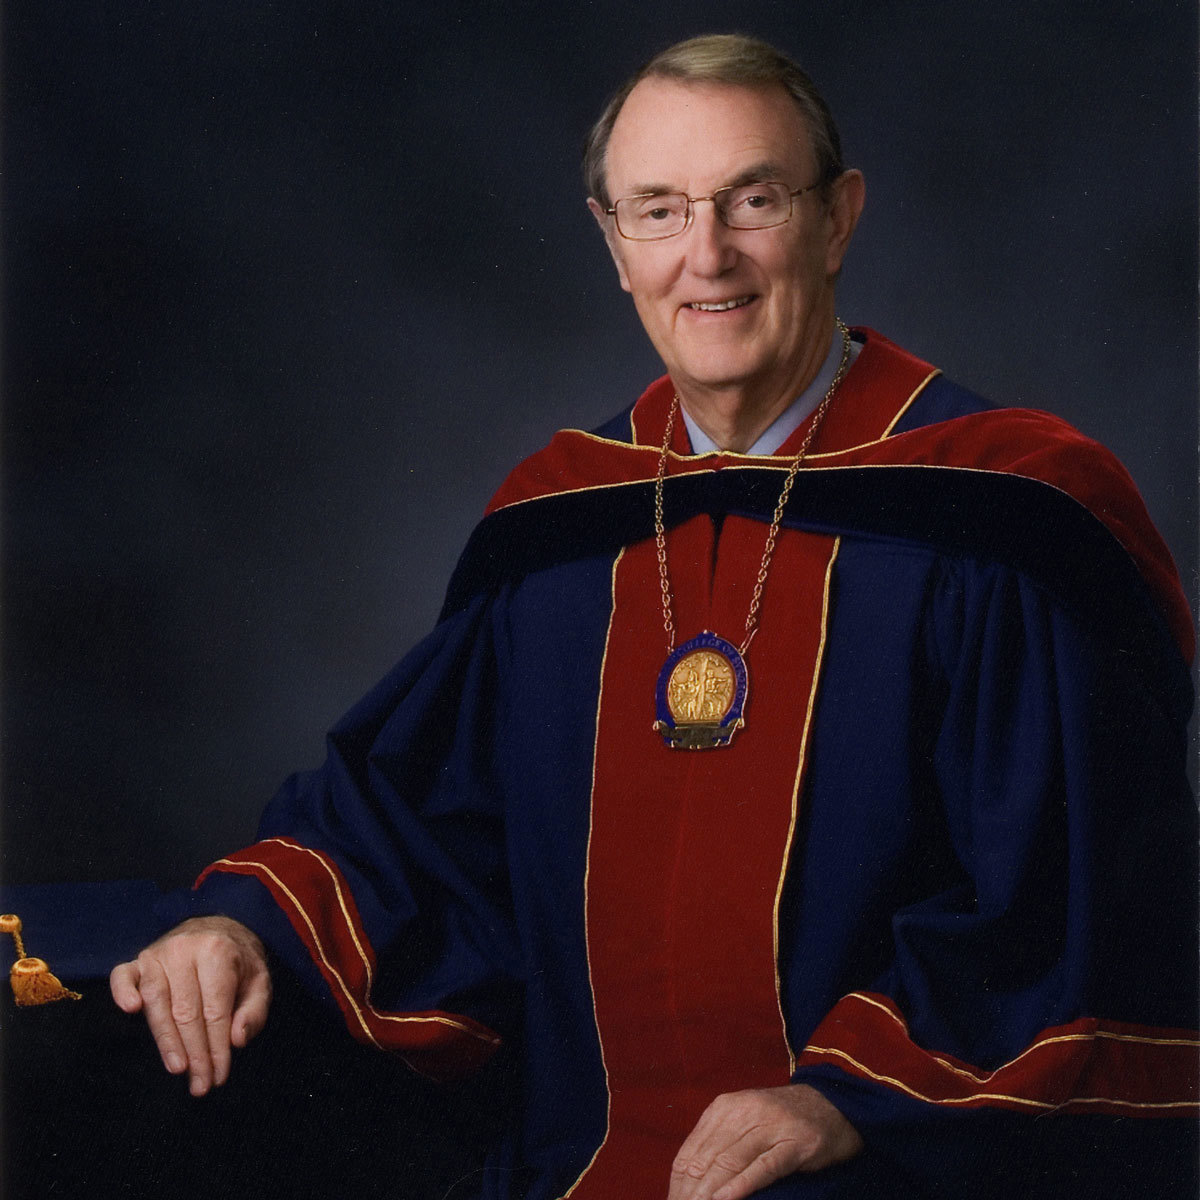 In Memoriam: Dr. Edward (Ted) Copeland, ACS Past-President